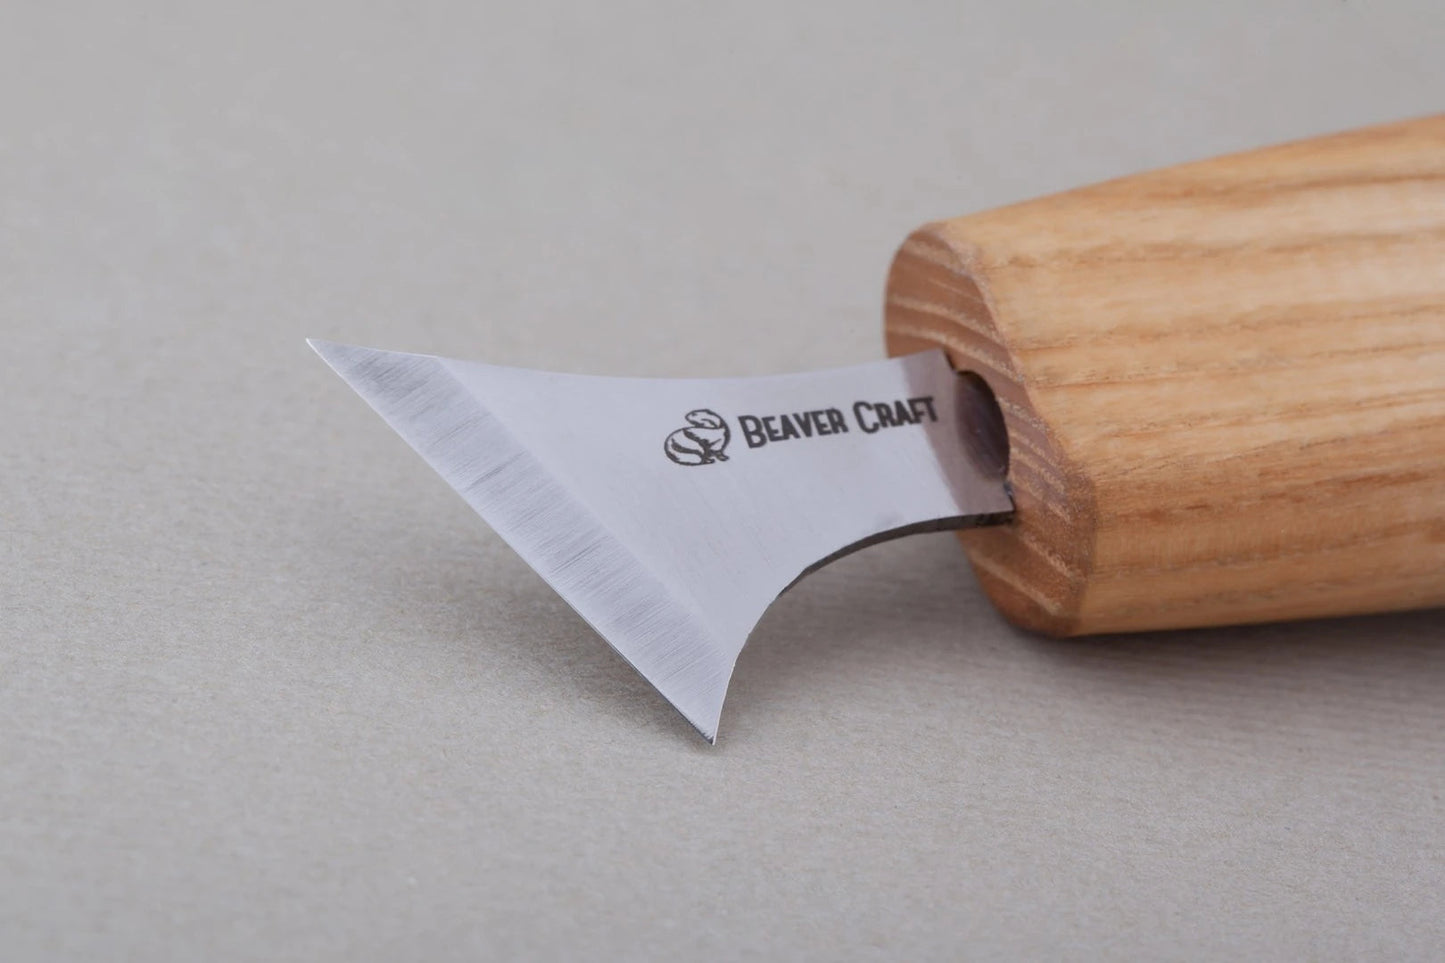 C10s - Small Knife for Chip Woodcarving